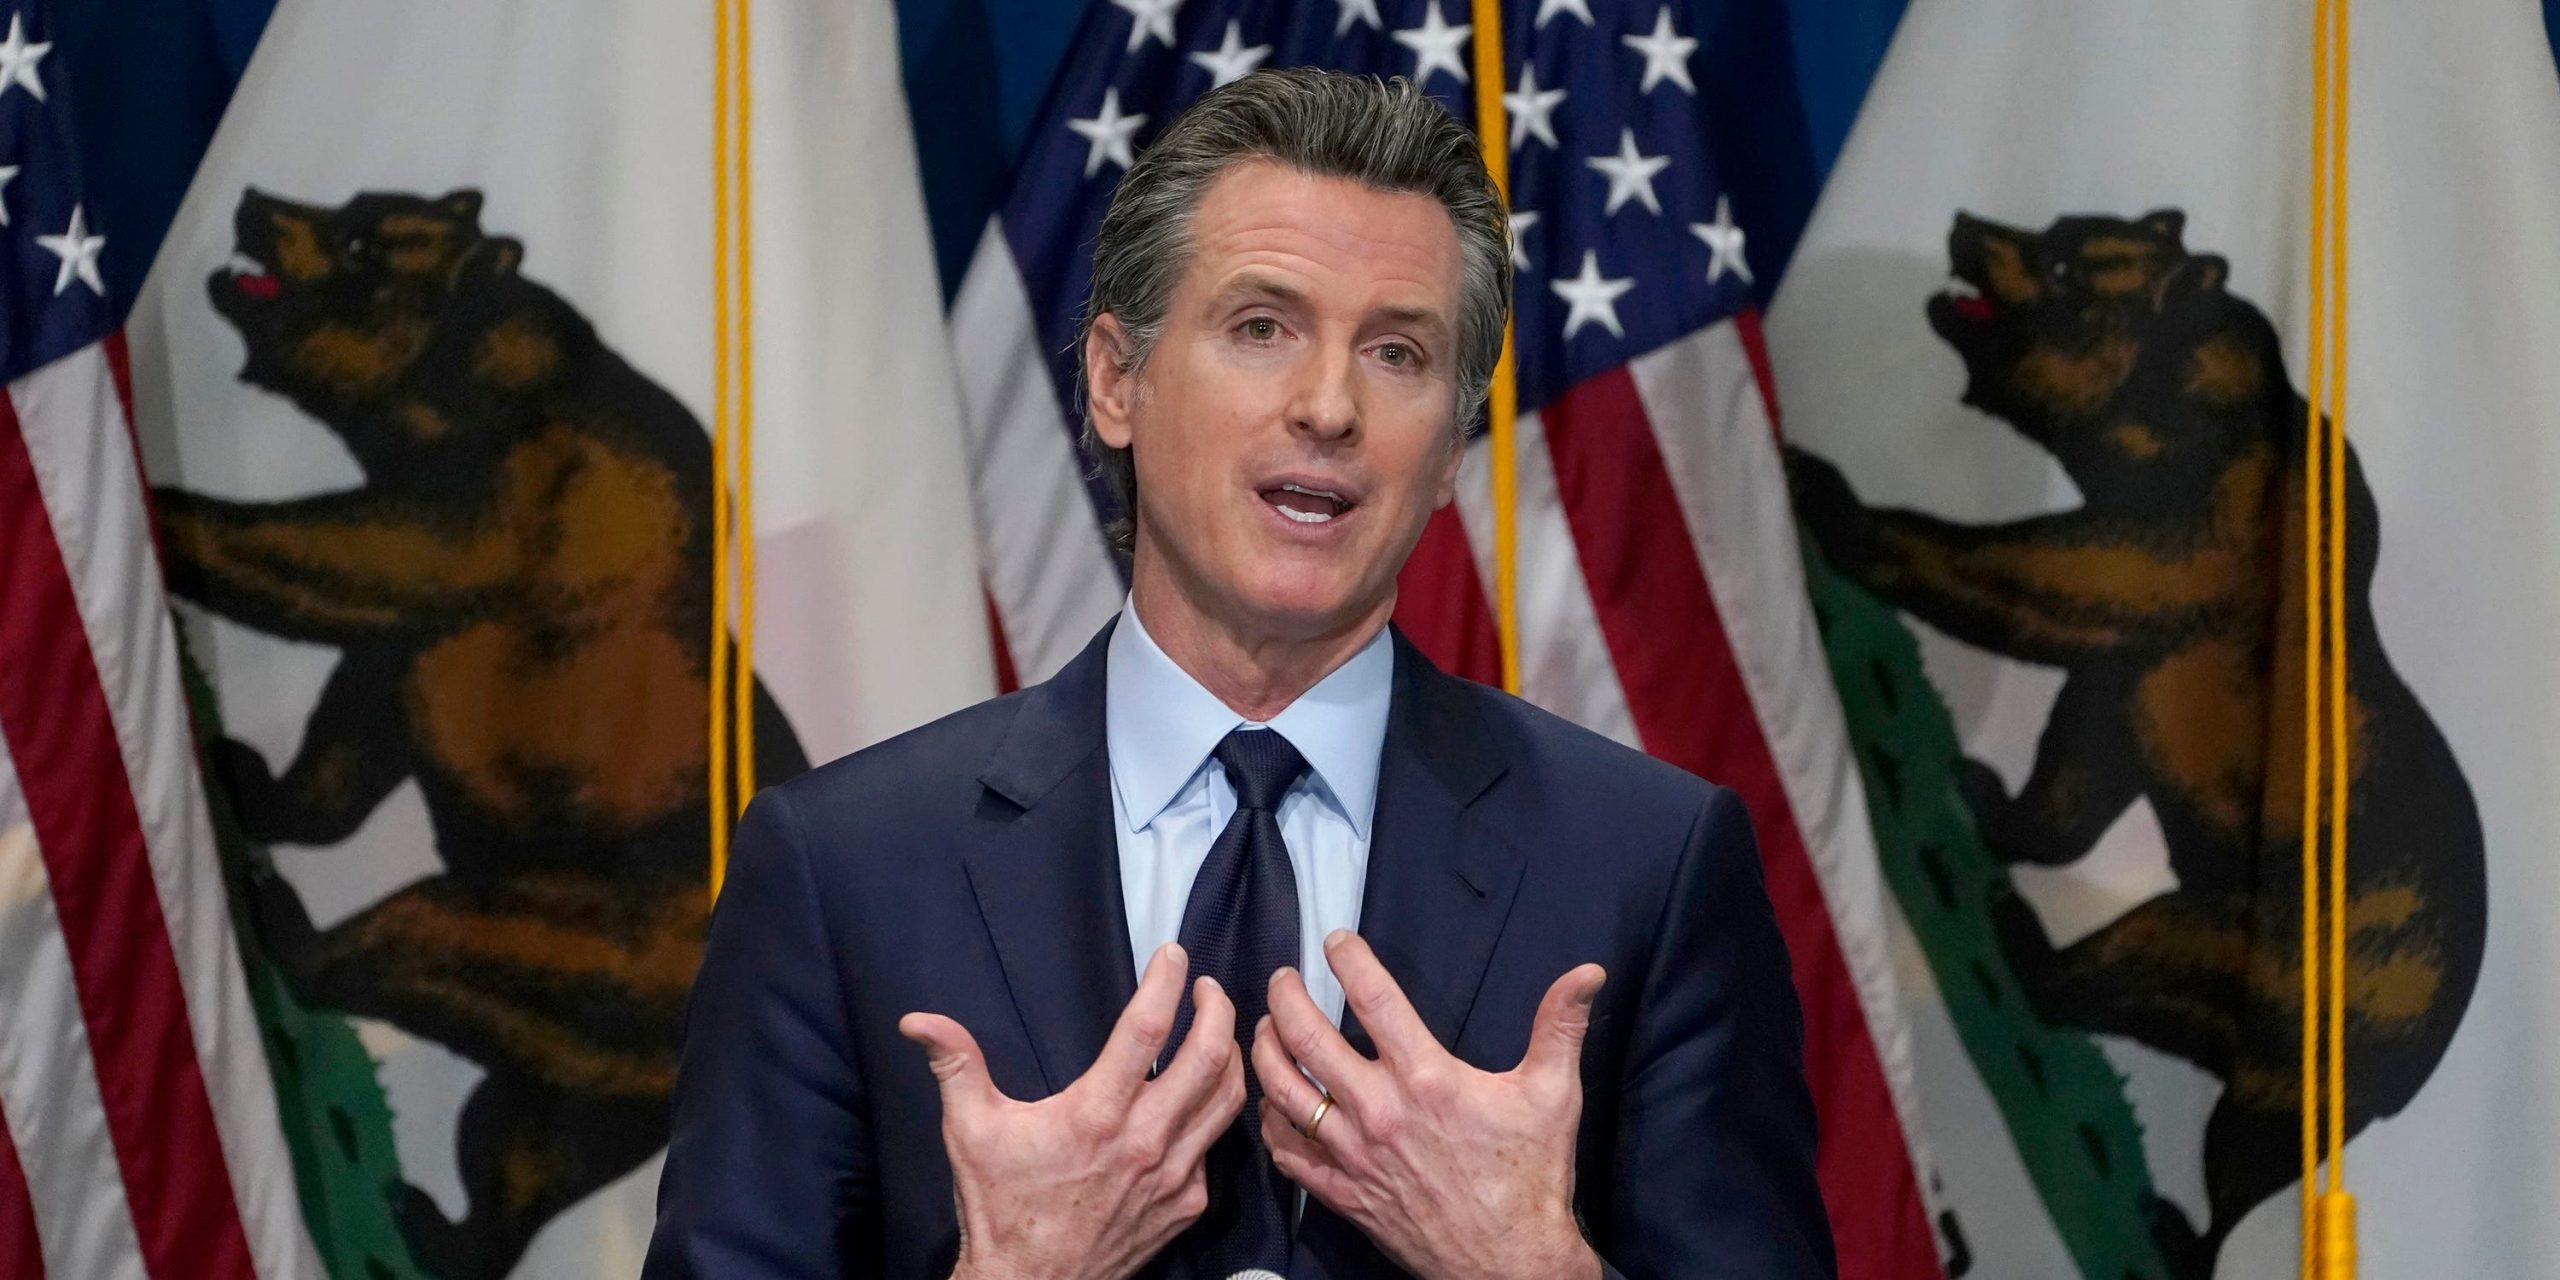 FILE - In this Jan. 8, 2021, file photo, California Gov. Gavin Newsom gestures during a news conference in Sacramento, Calif. Californians will start receiving ballots next month asking if Newsom, a Democrat should be recalled and if so, who they want to vote to replace him.